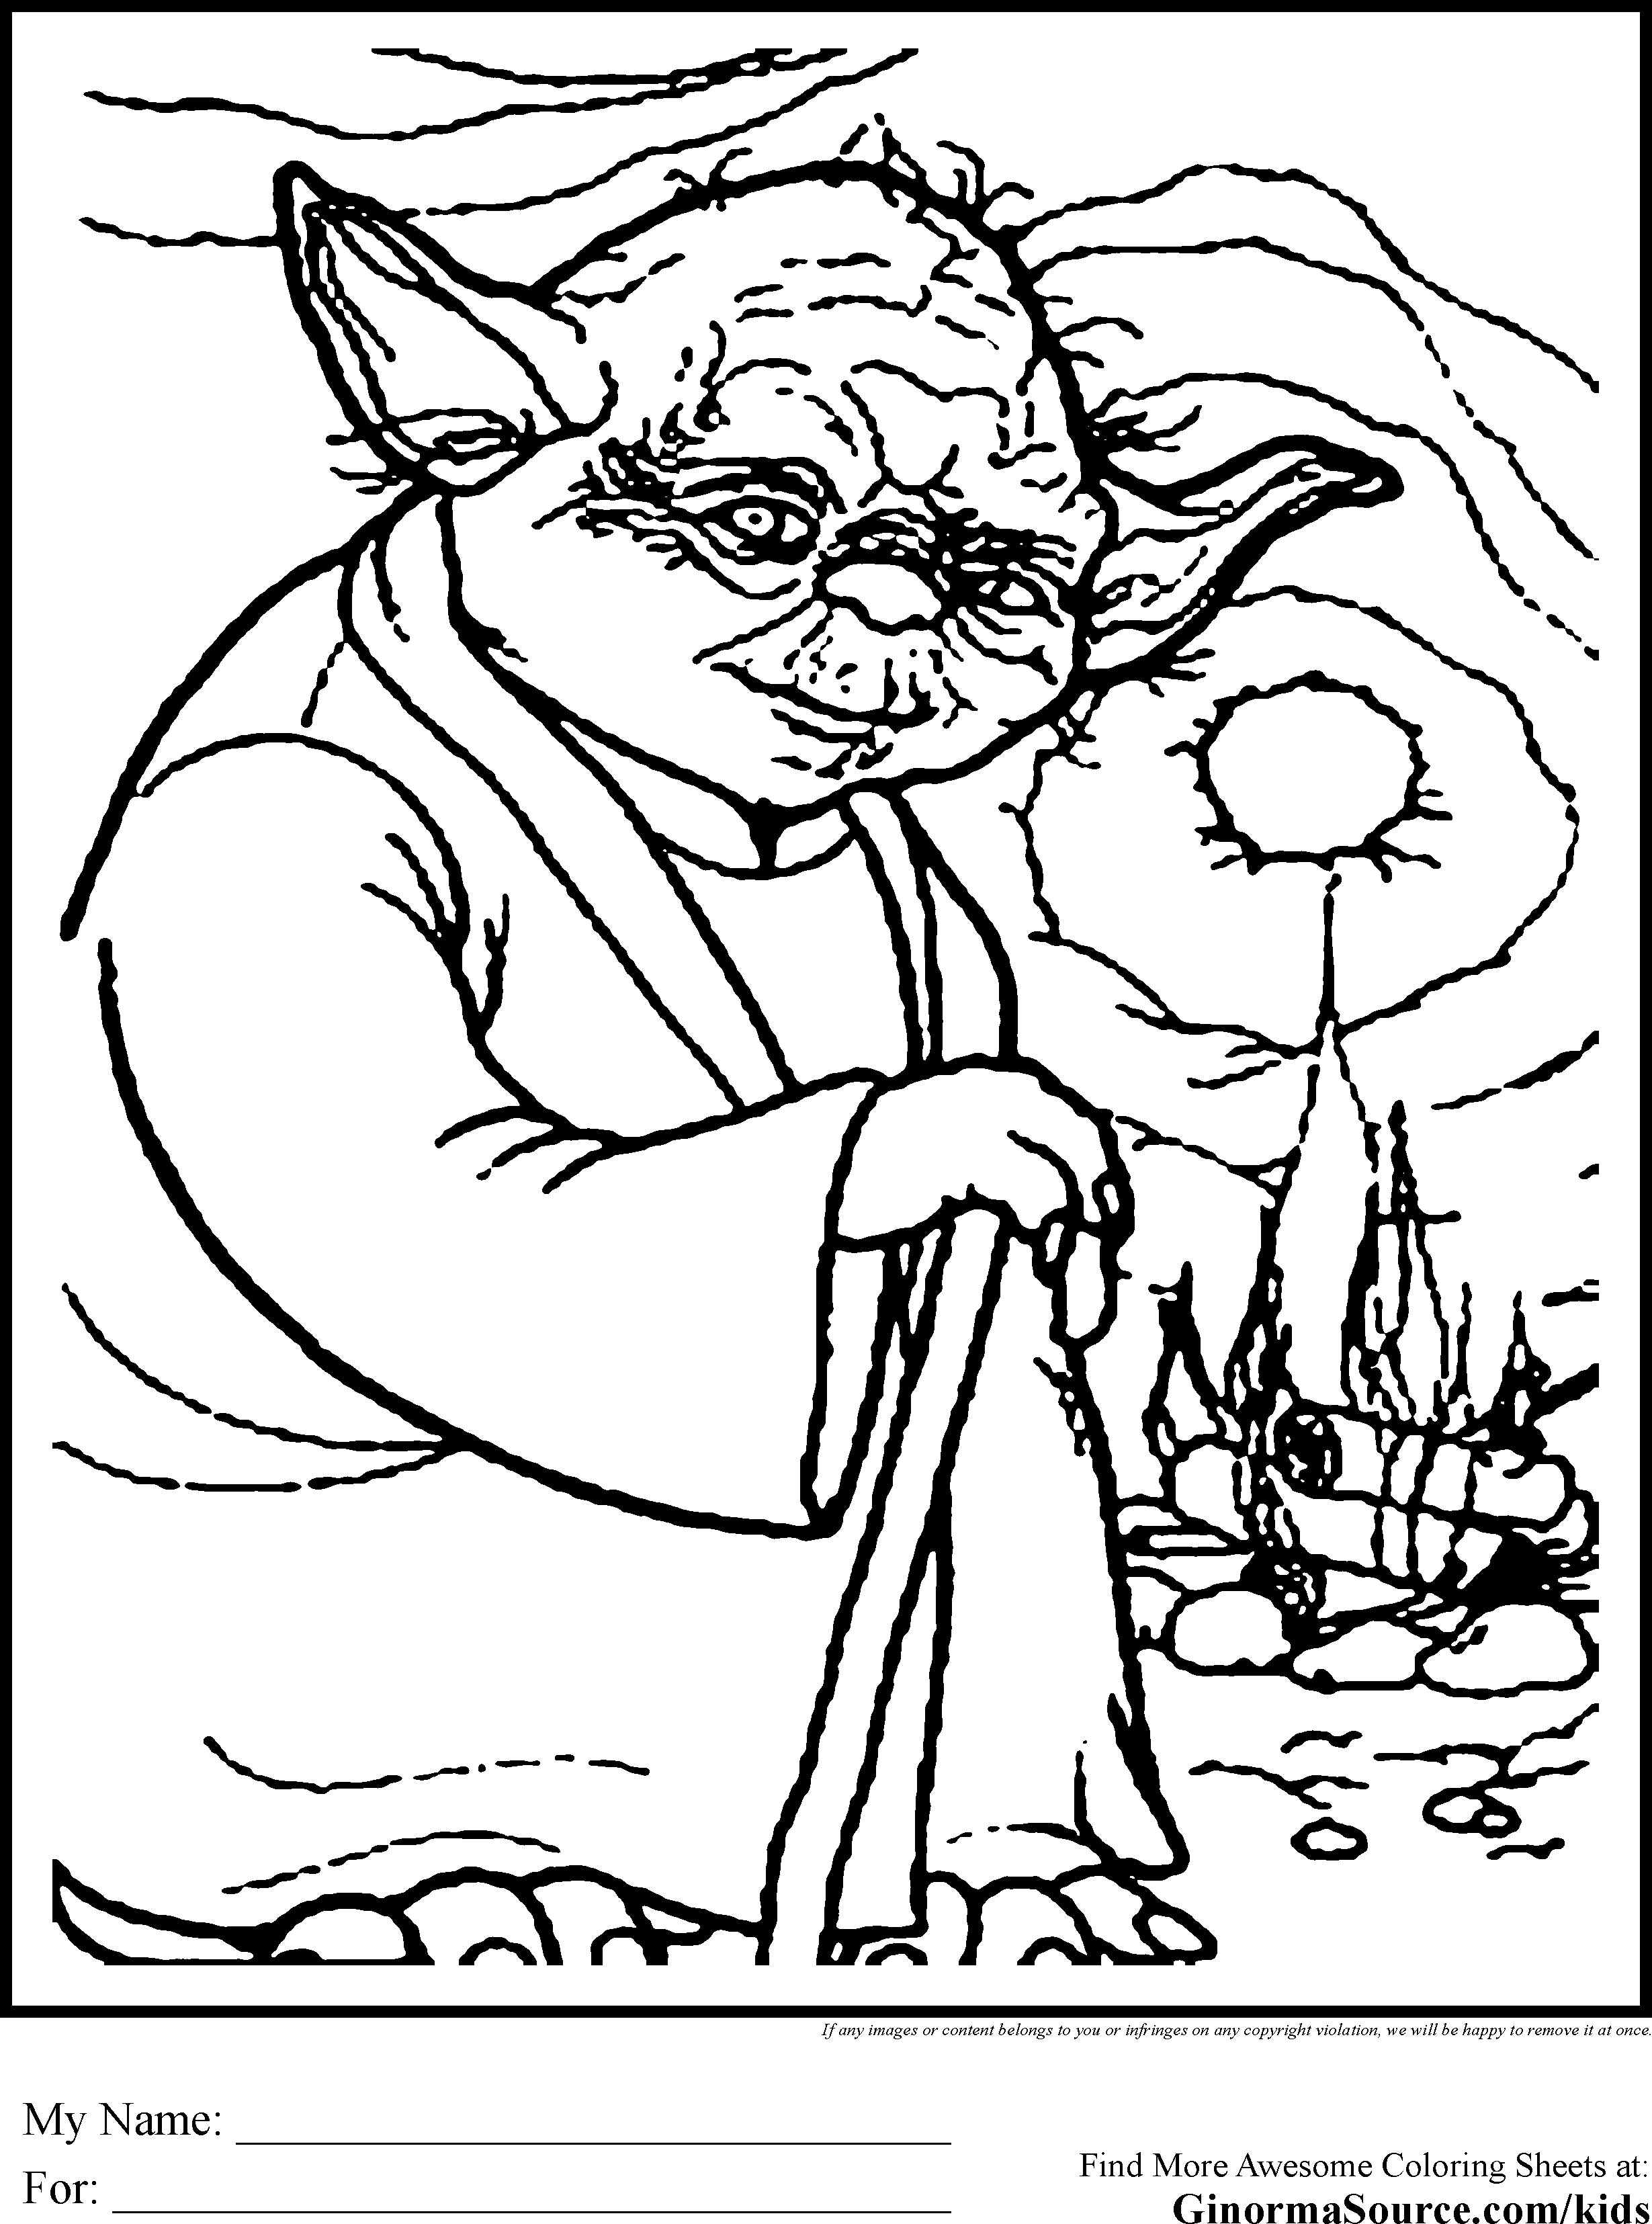 Star Wars Coloring Pages Free: 40 Image Available - VoteForVerde.com